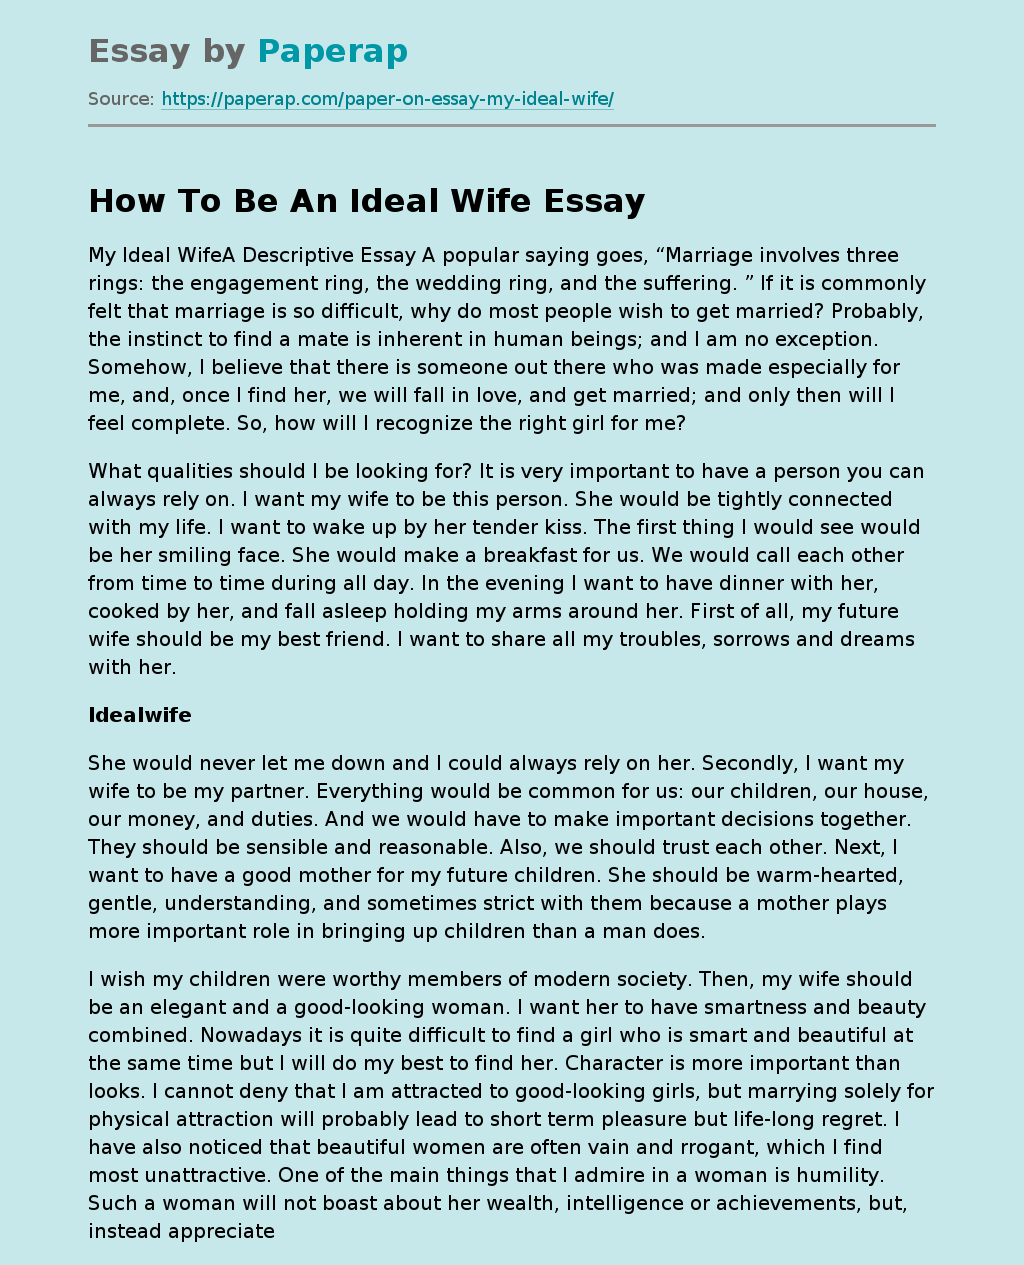 How To Be An Ideal Wife